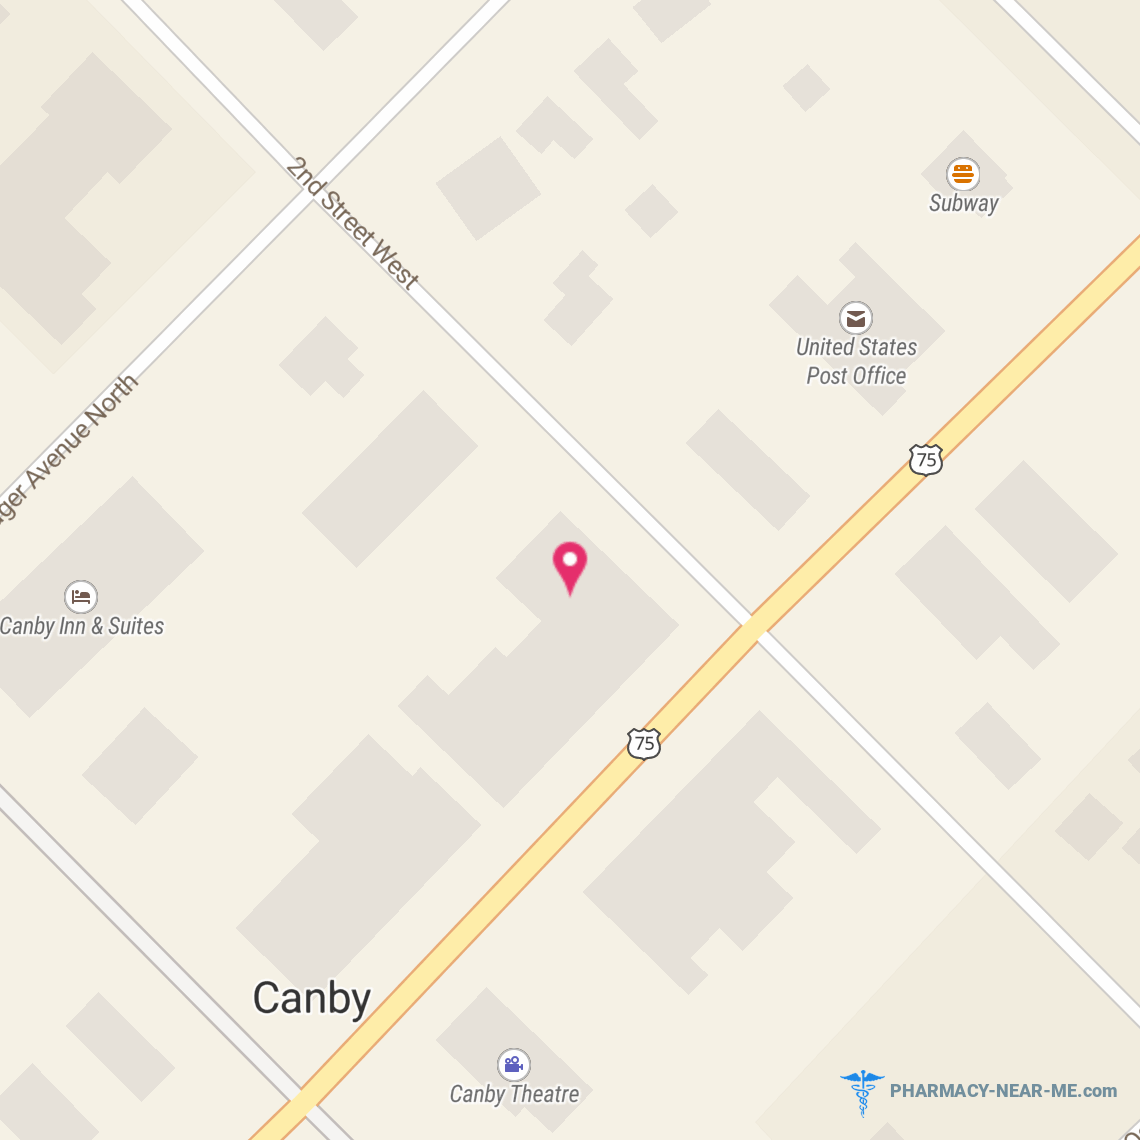 CANBY DRUG & GIFTS - Pharmacy Hours, Phone, Reviews & Information: 130 Saint Olaf Avenue North, Canby, Minnesota 56220, United States